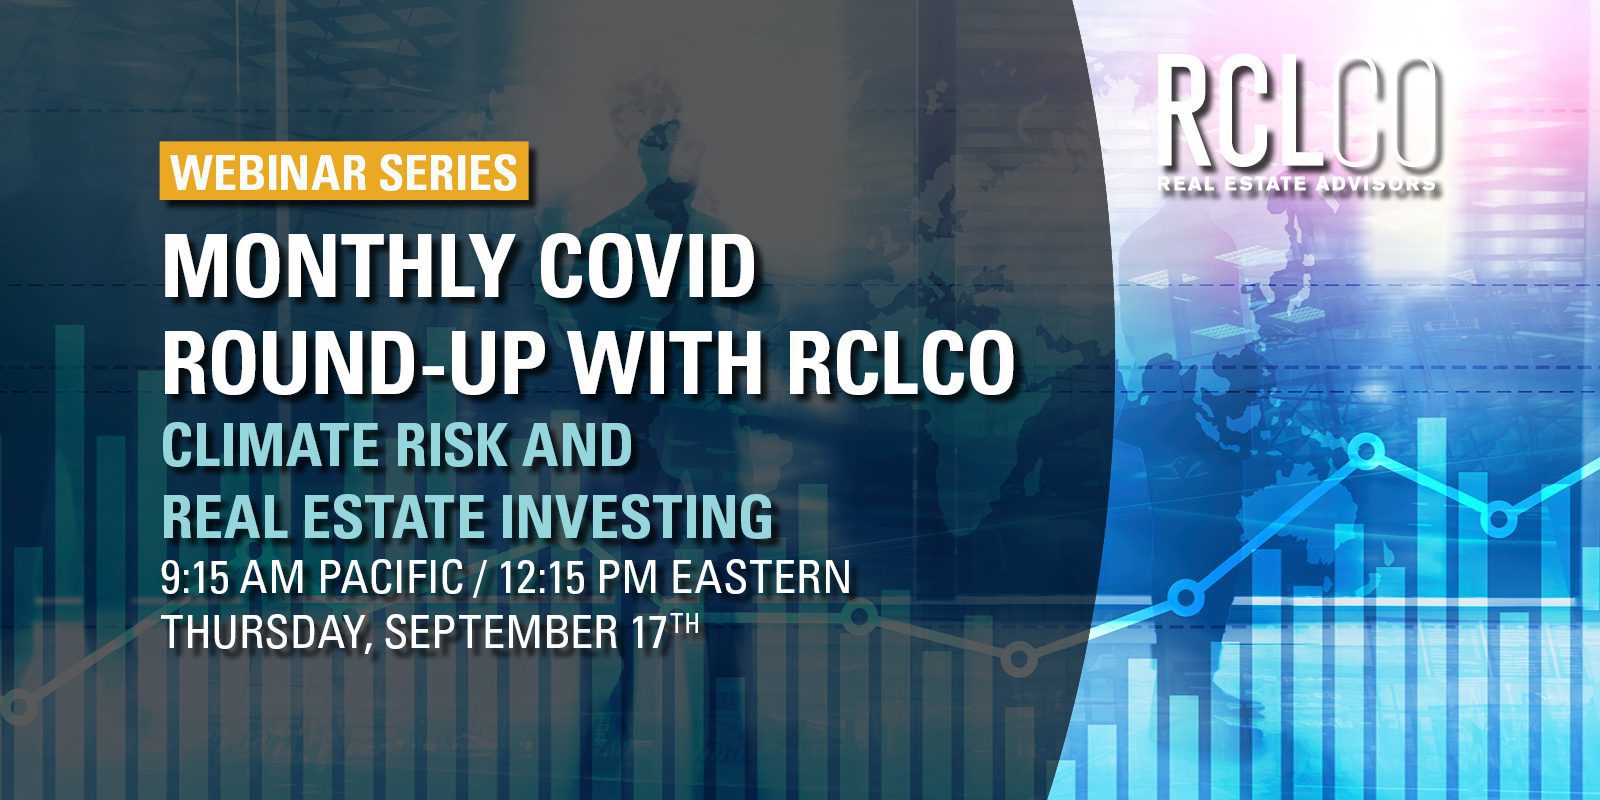 RCLCO COVID Round-Up: September 17, 2020